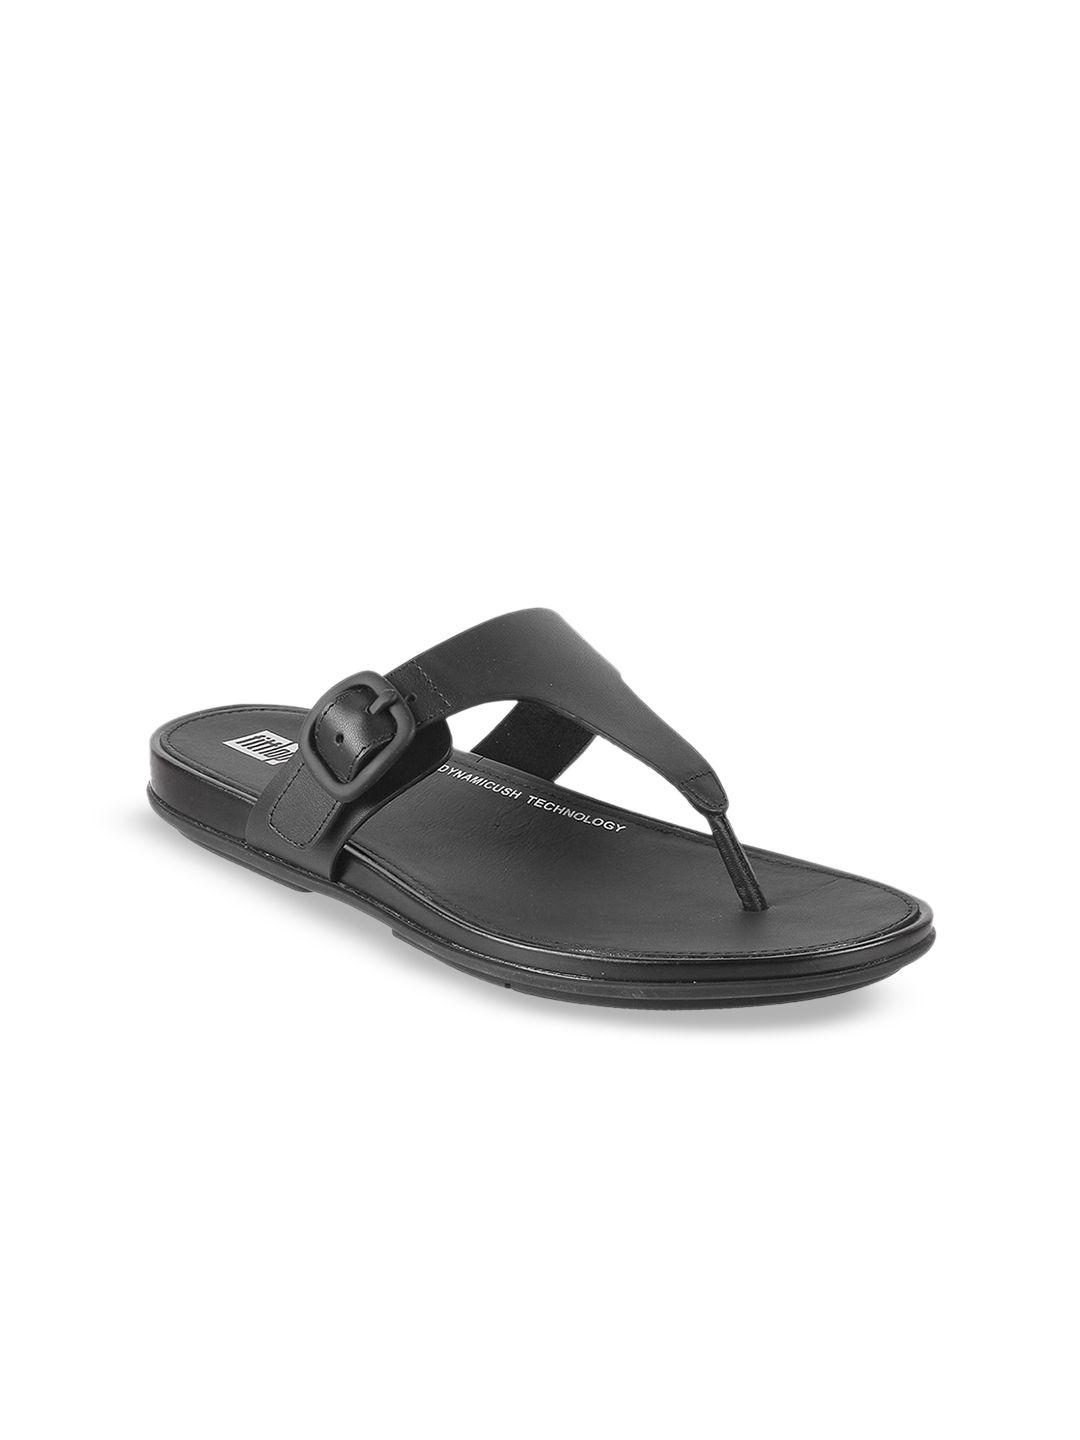 fitflop women black striped t-strap flats with buckles